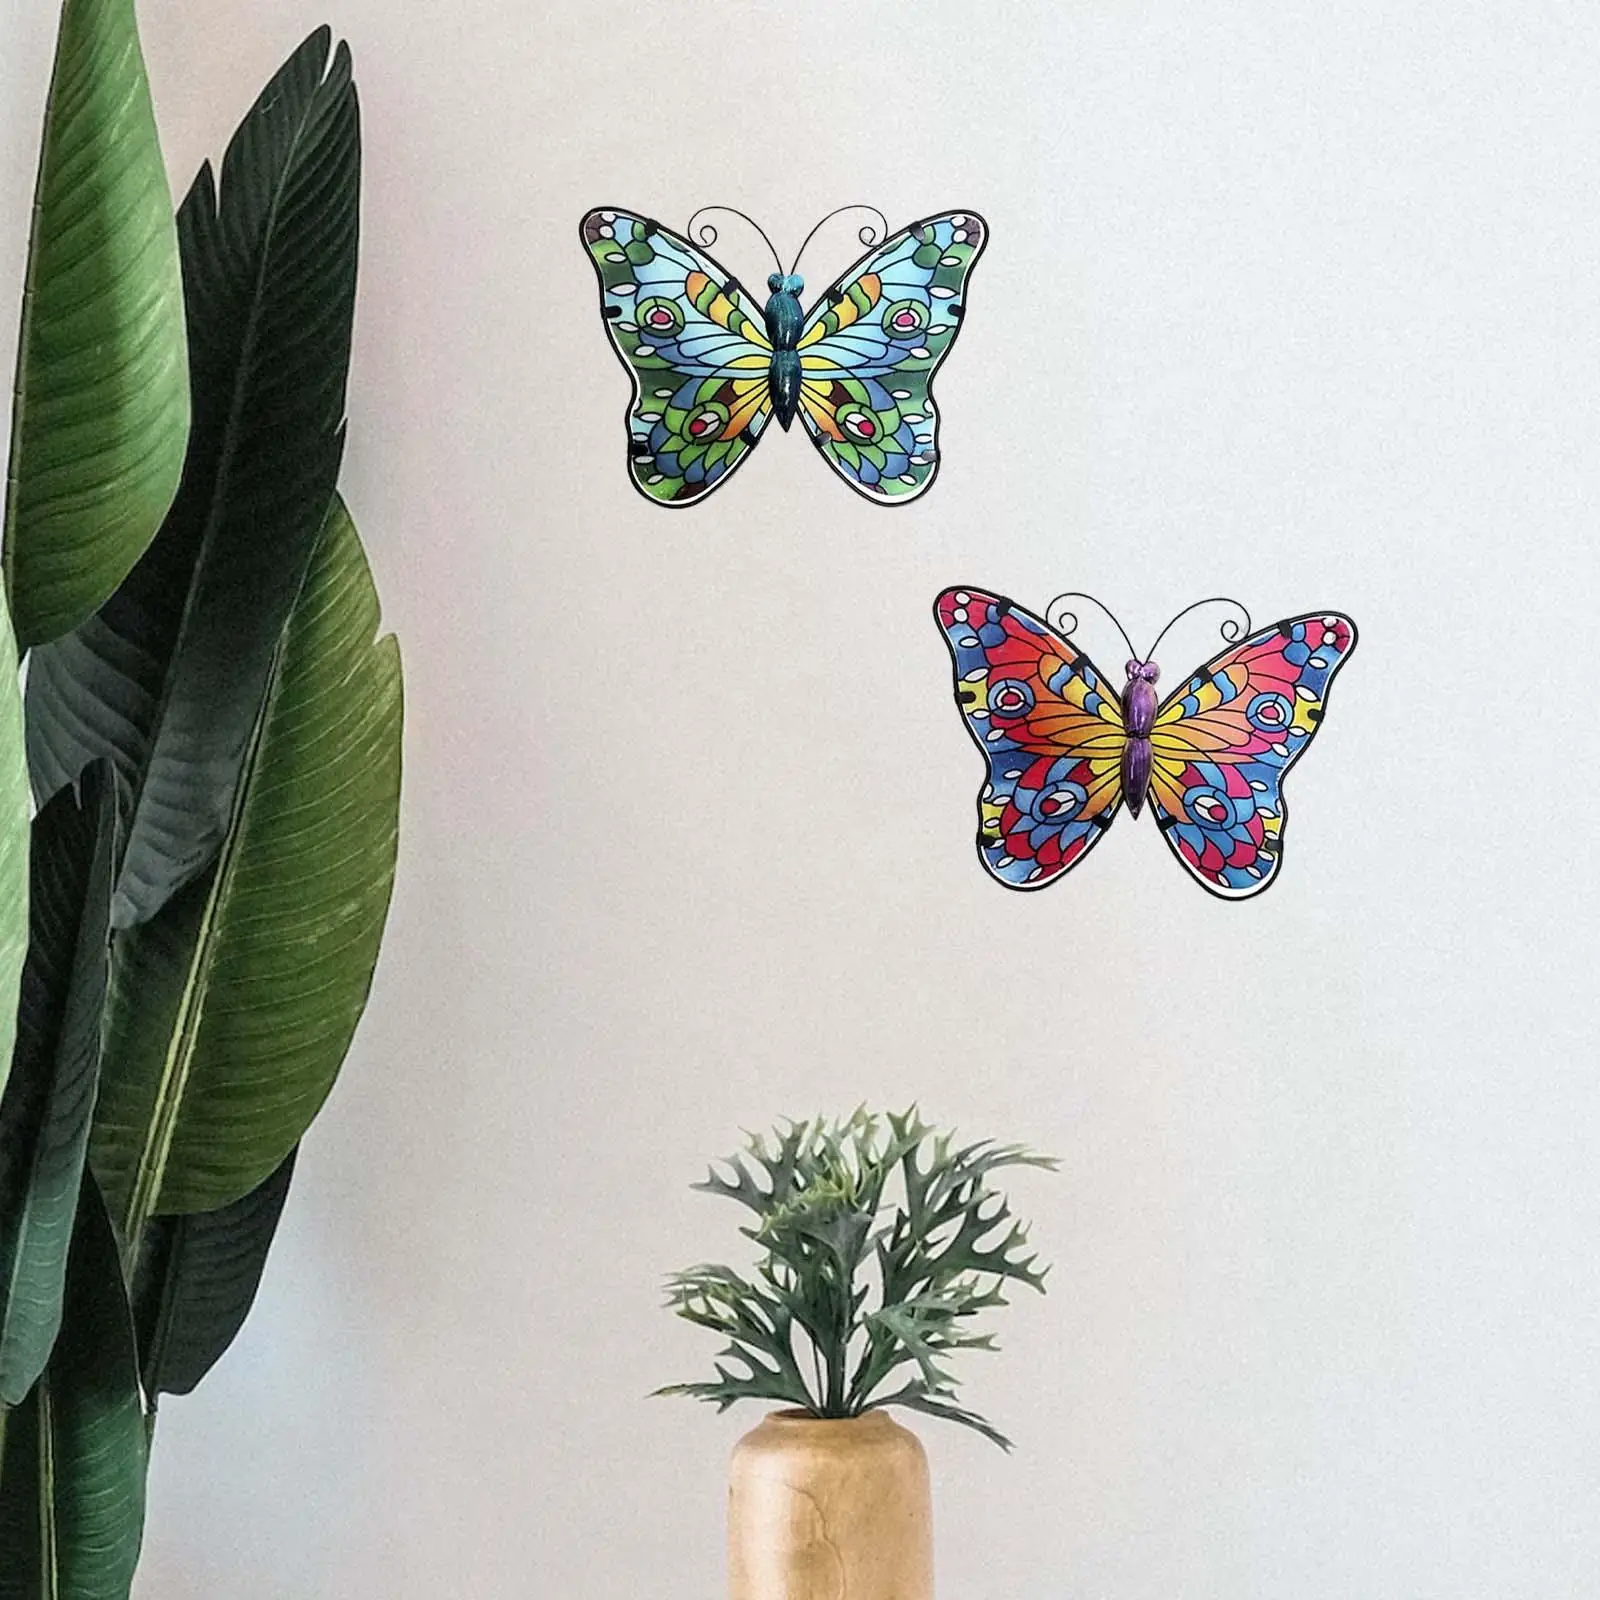 2x 3D Butterfly Ornaments Figurine Hanging Ornament Plaque Wall Decor Metal for Patio Outdoor Decor Office Backyard